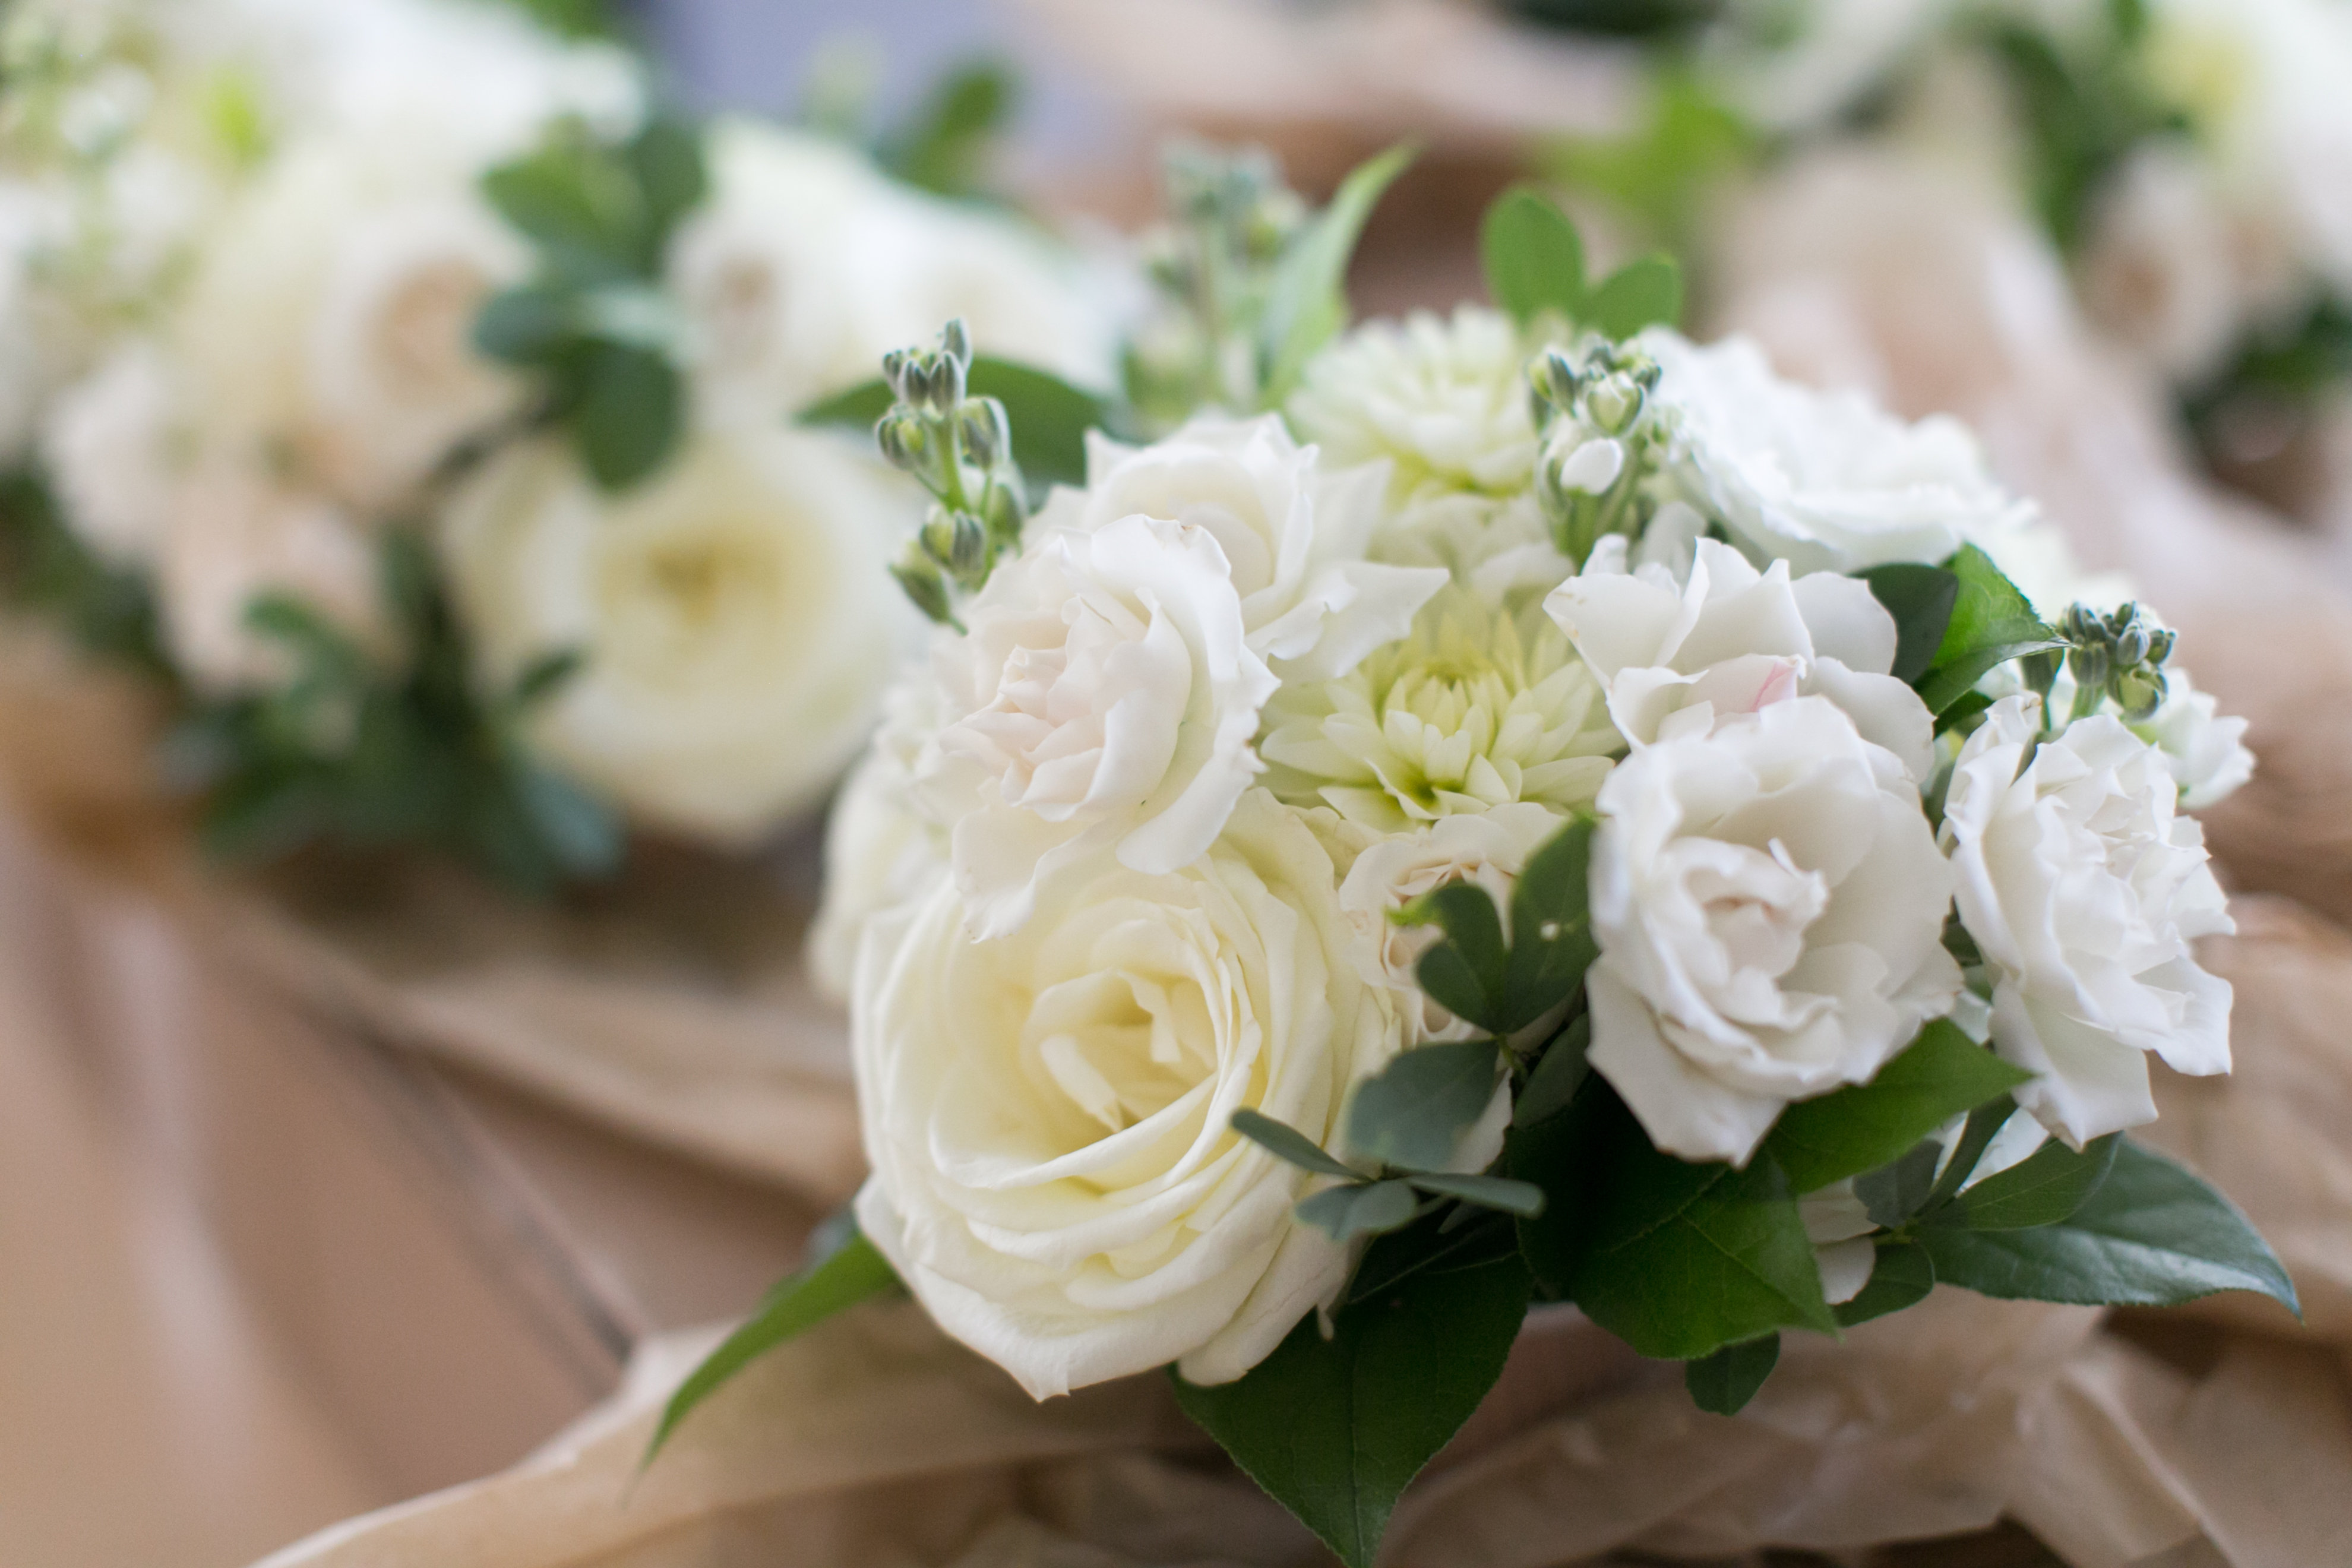 Ivory summer wedding bouquet with dahlias and garden roses.